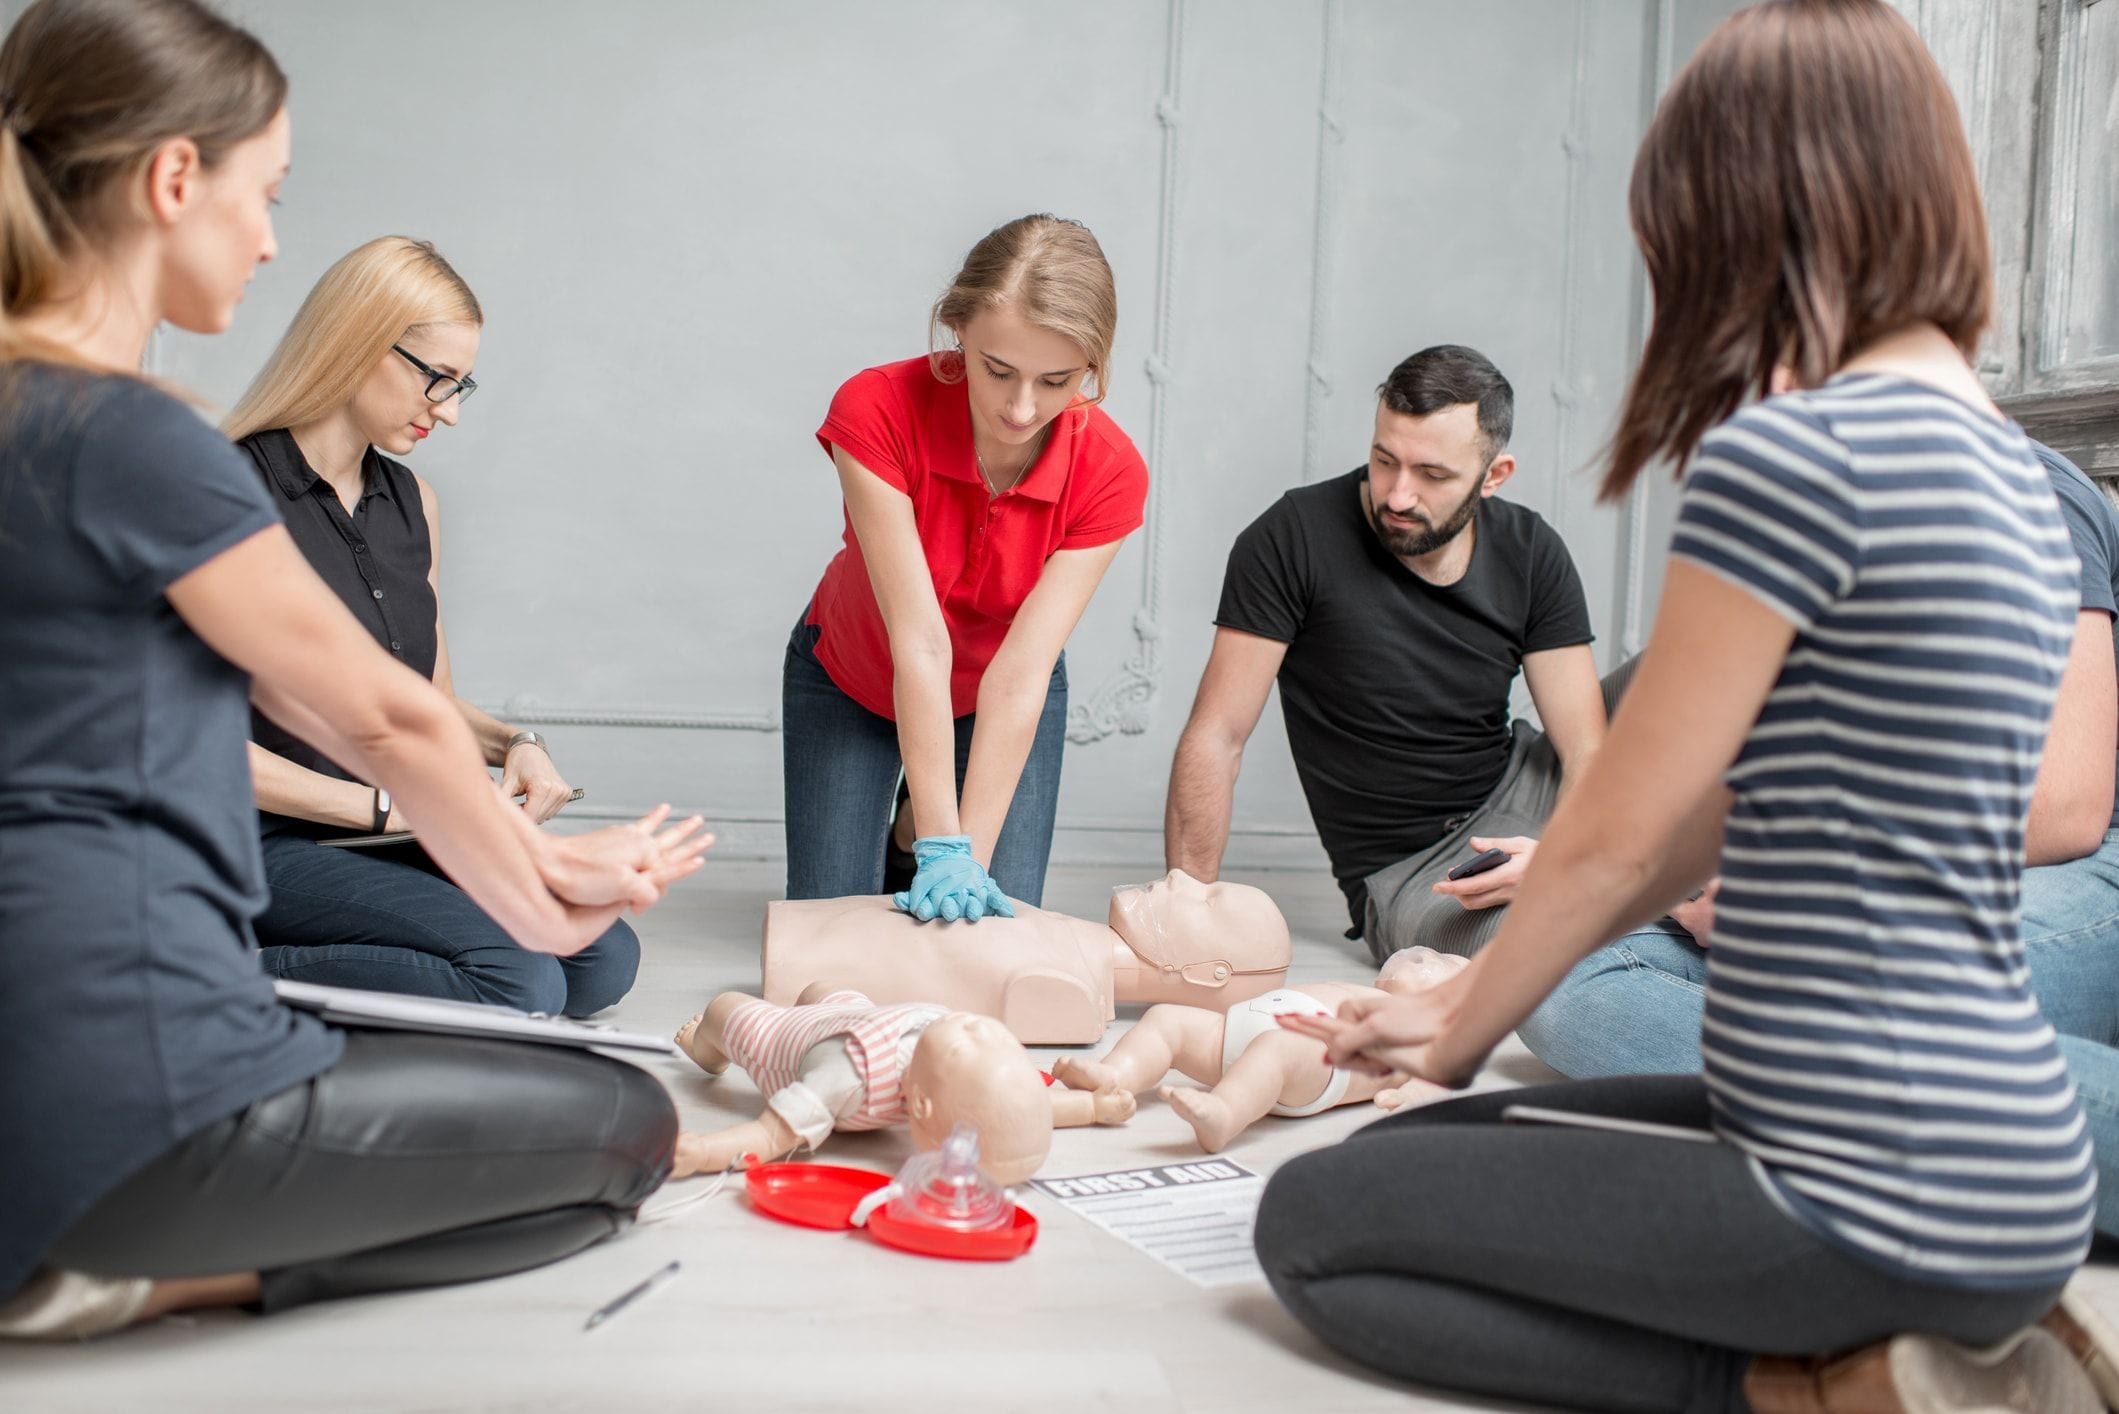 How to get first-aid and CPR training